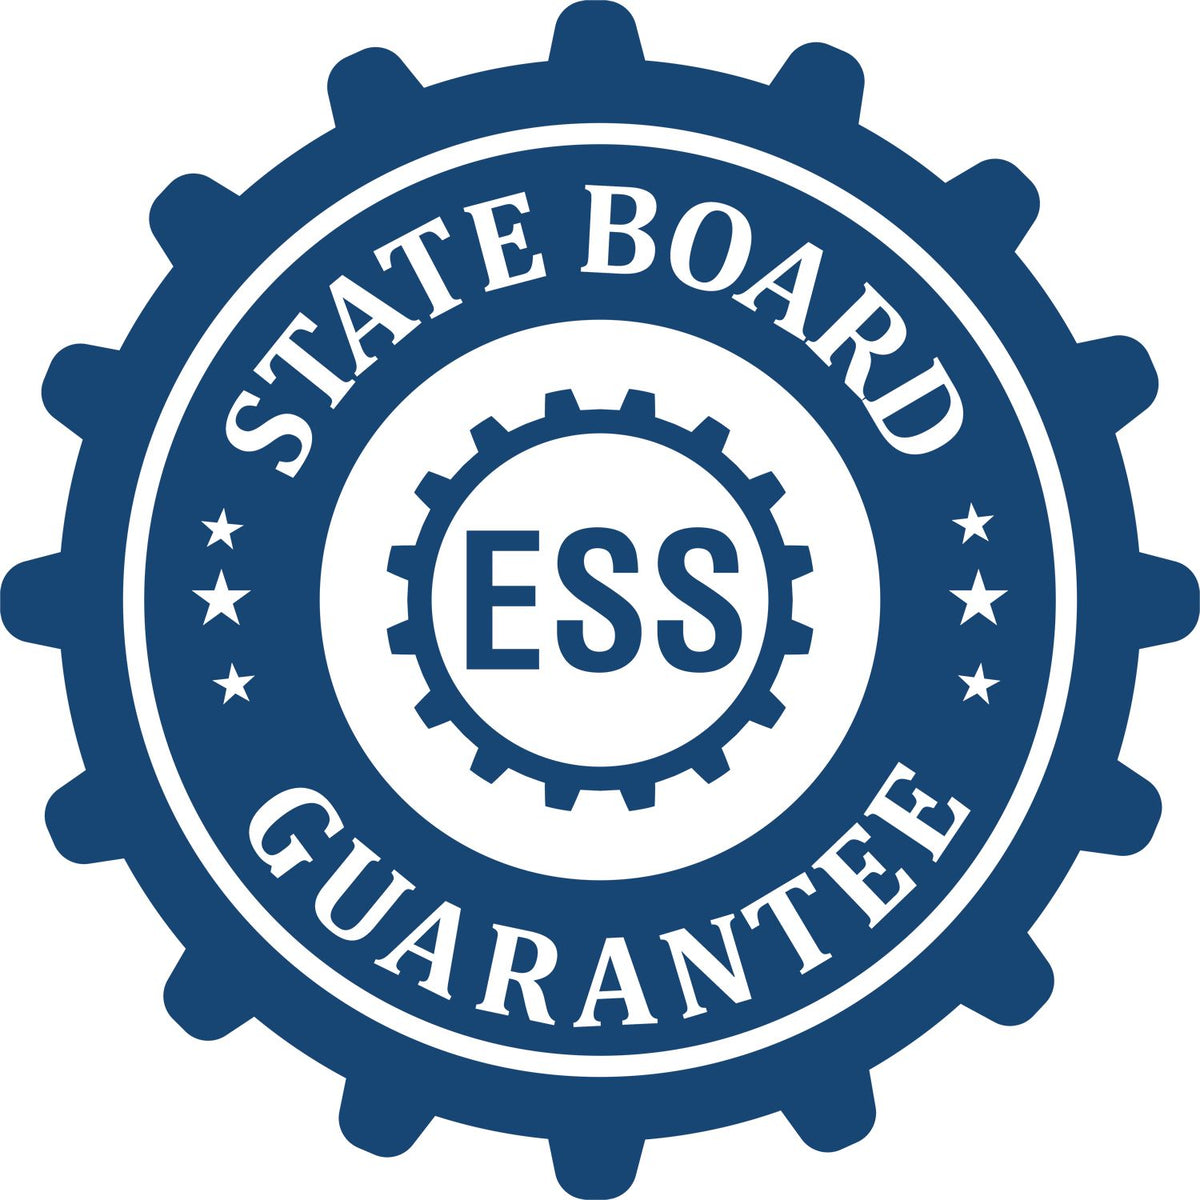 An emblem in a gear shape illustrating a state board guarantee for the Michigan Professional Geologist Seal Stamp